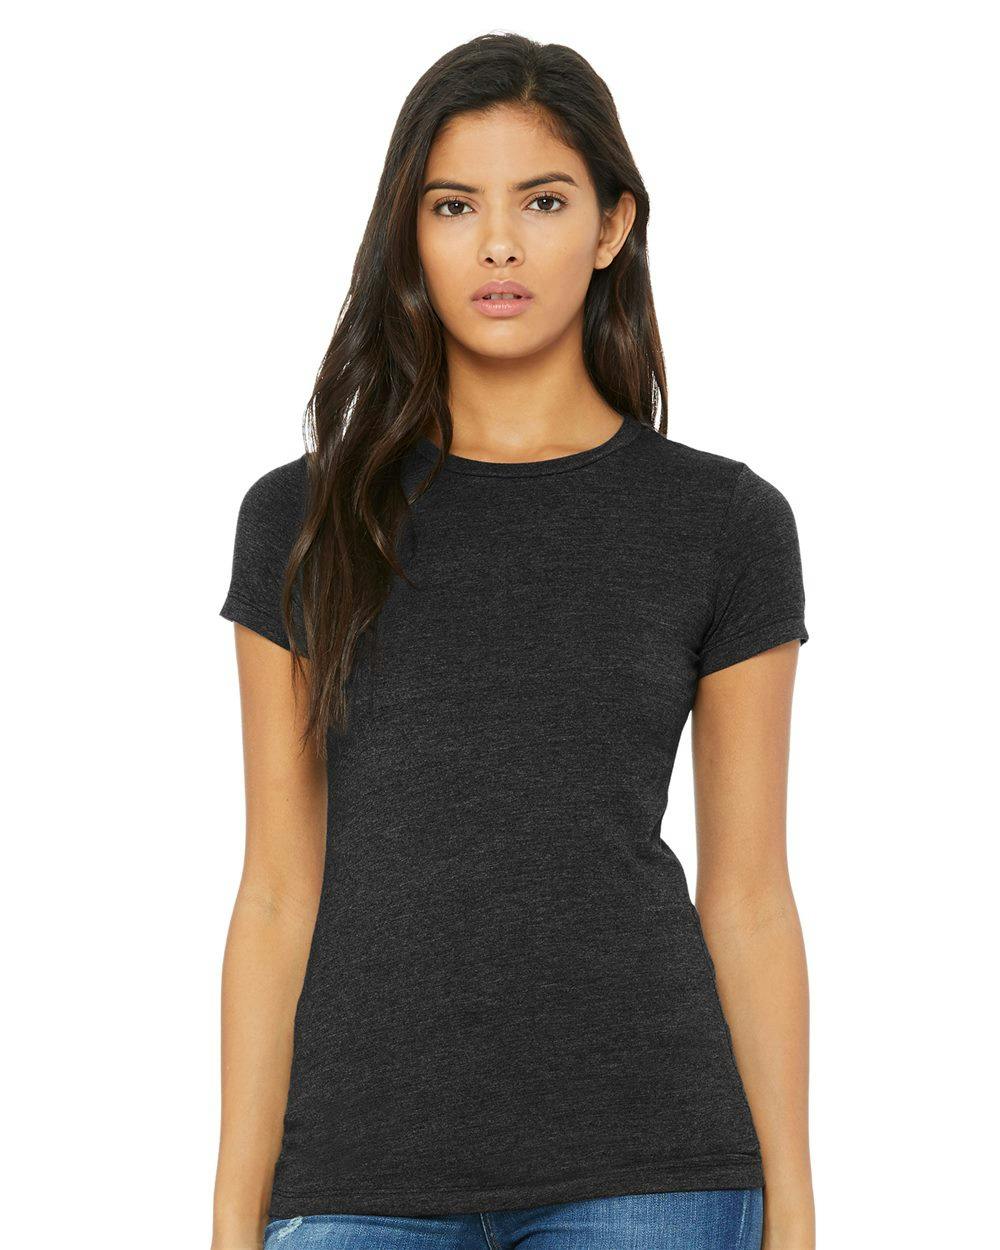 Image for Women's Slim Fit Tee - 6004